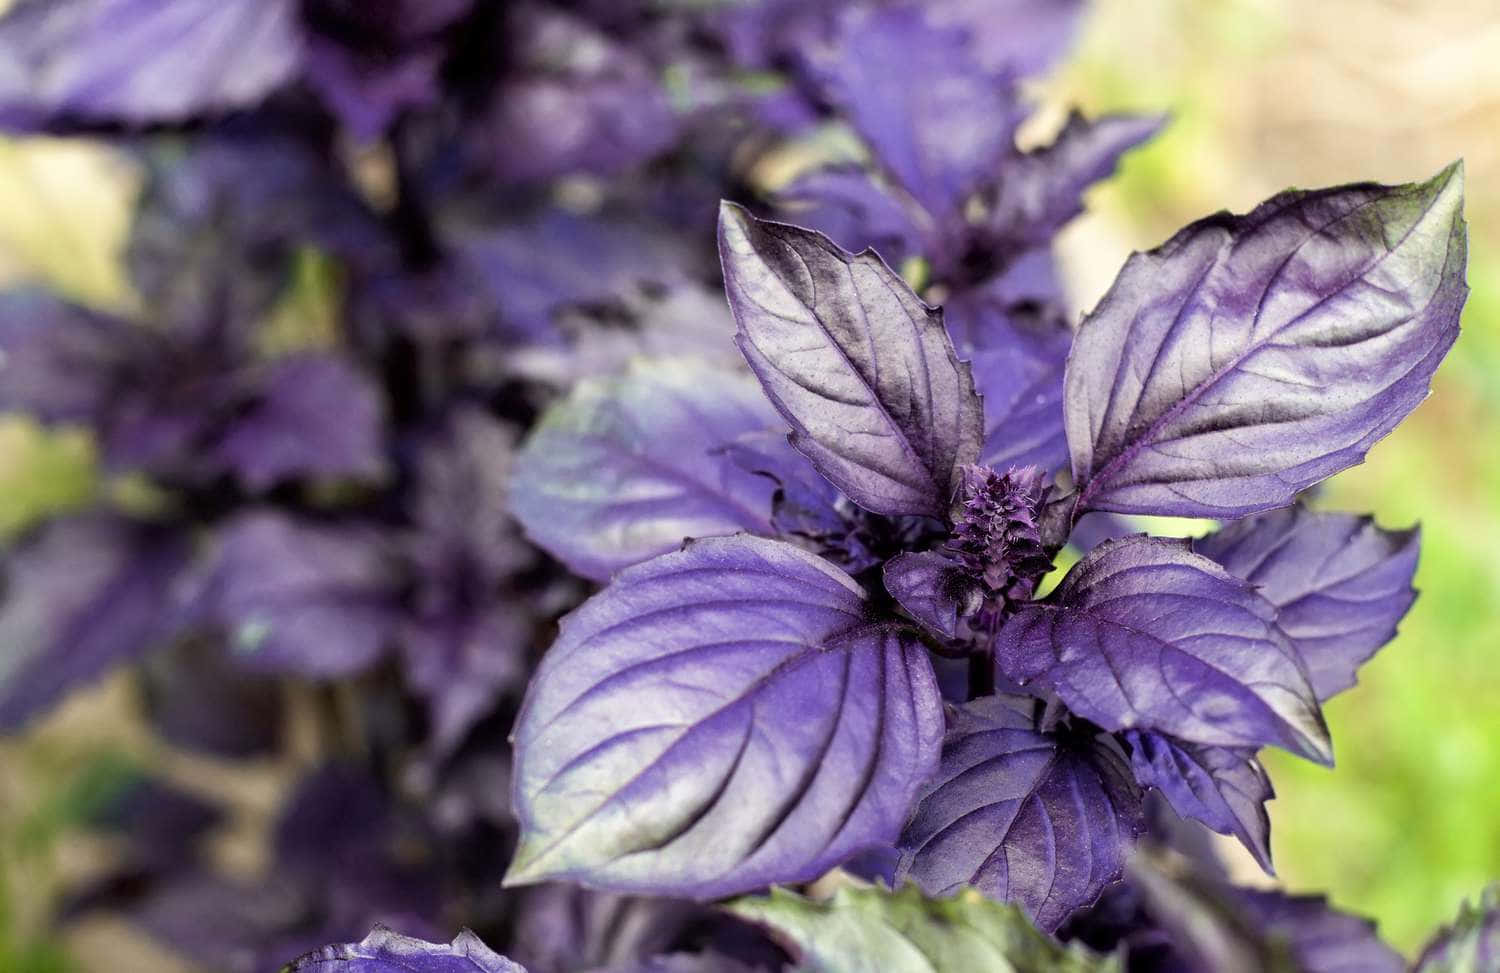 The spicy aroma of purple basil is sure to tantalize the taste buds. Wallpaper